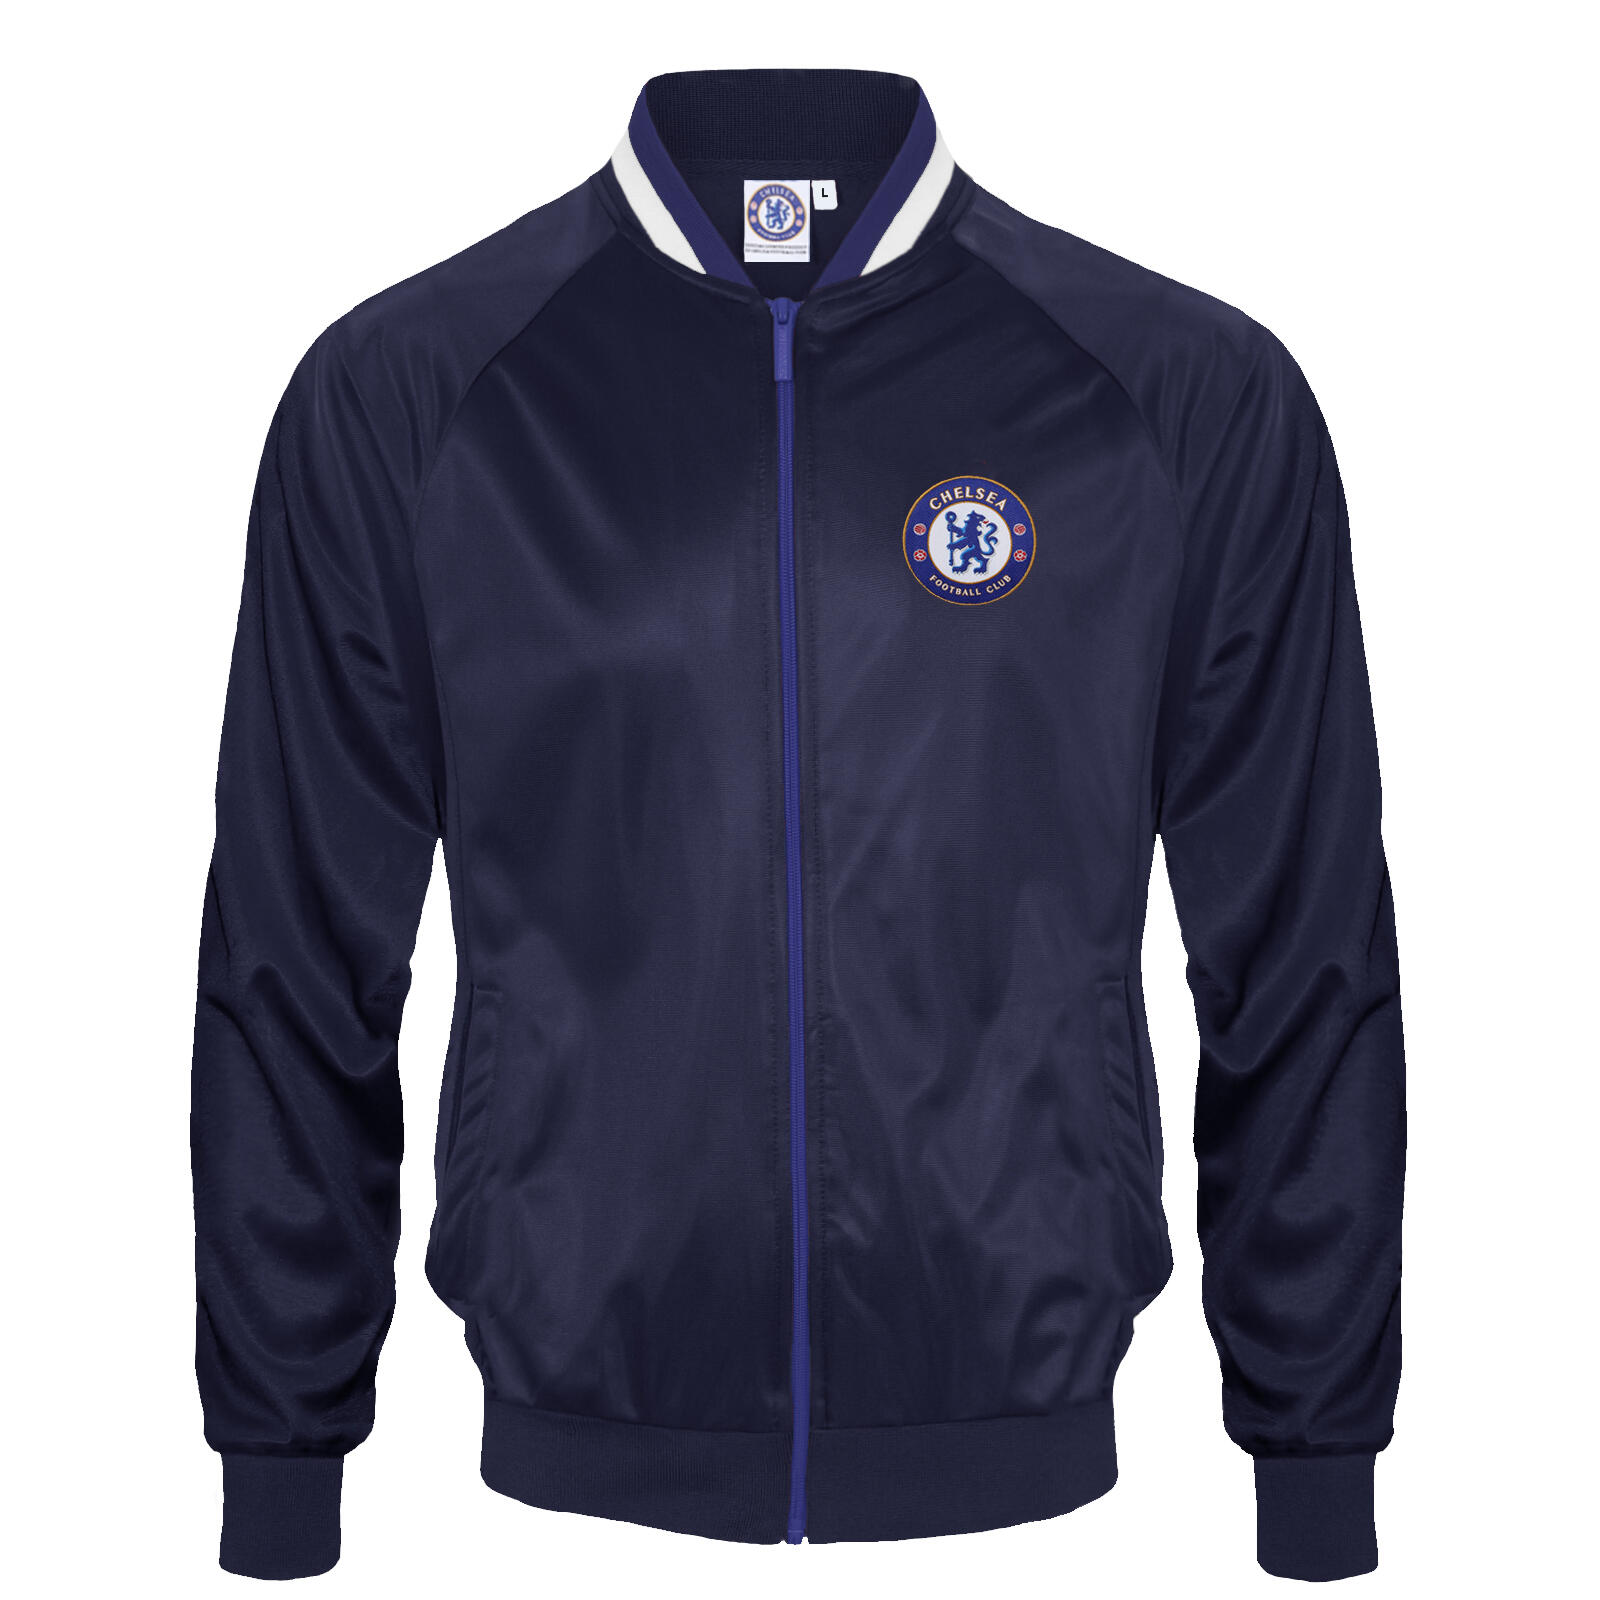 CHELSEA Chelsea FC Mens Jacket Track Top Retro OFFICIAL Football Gift